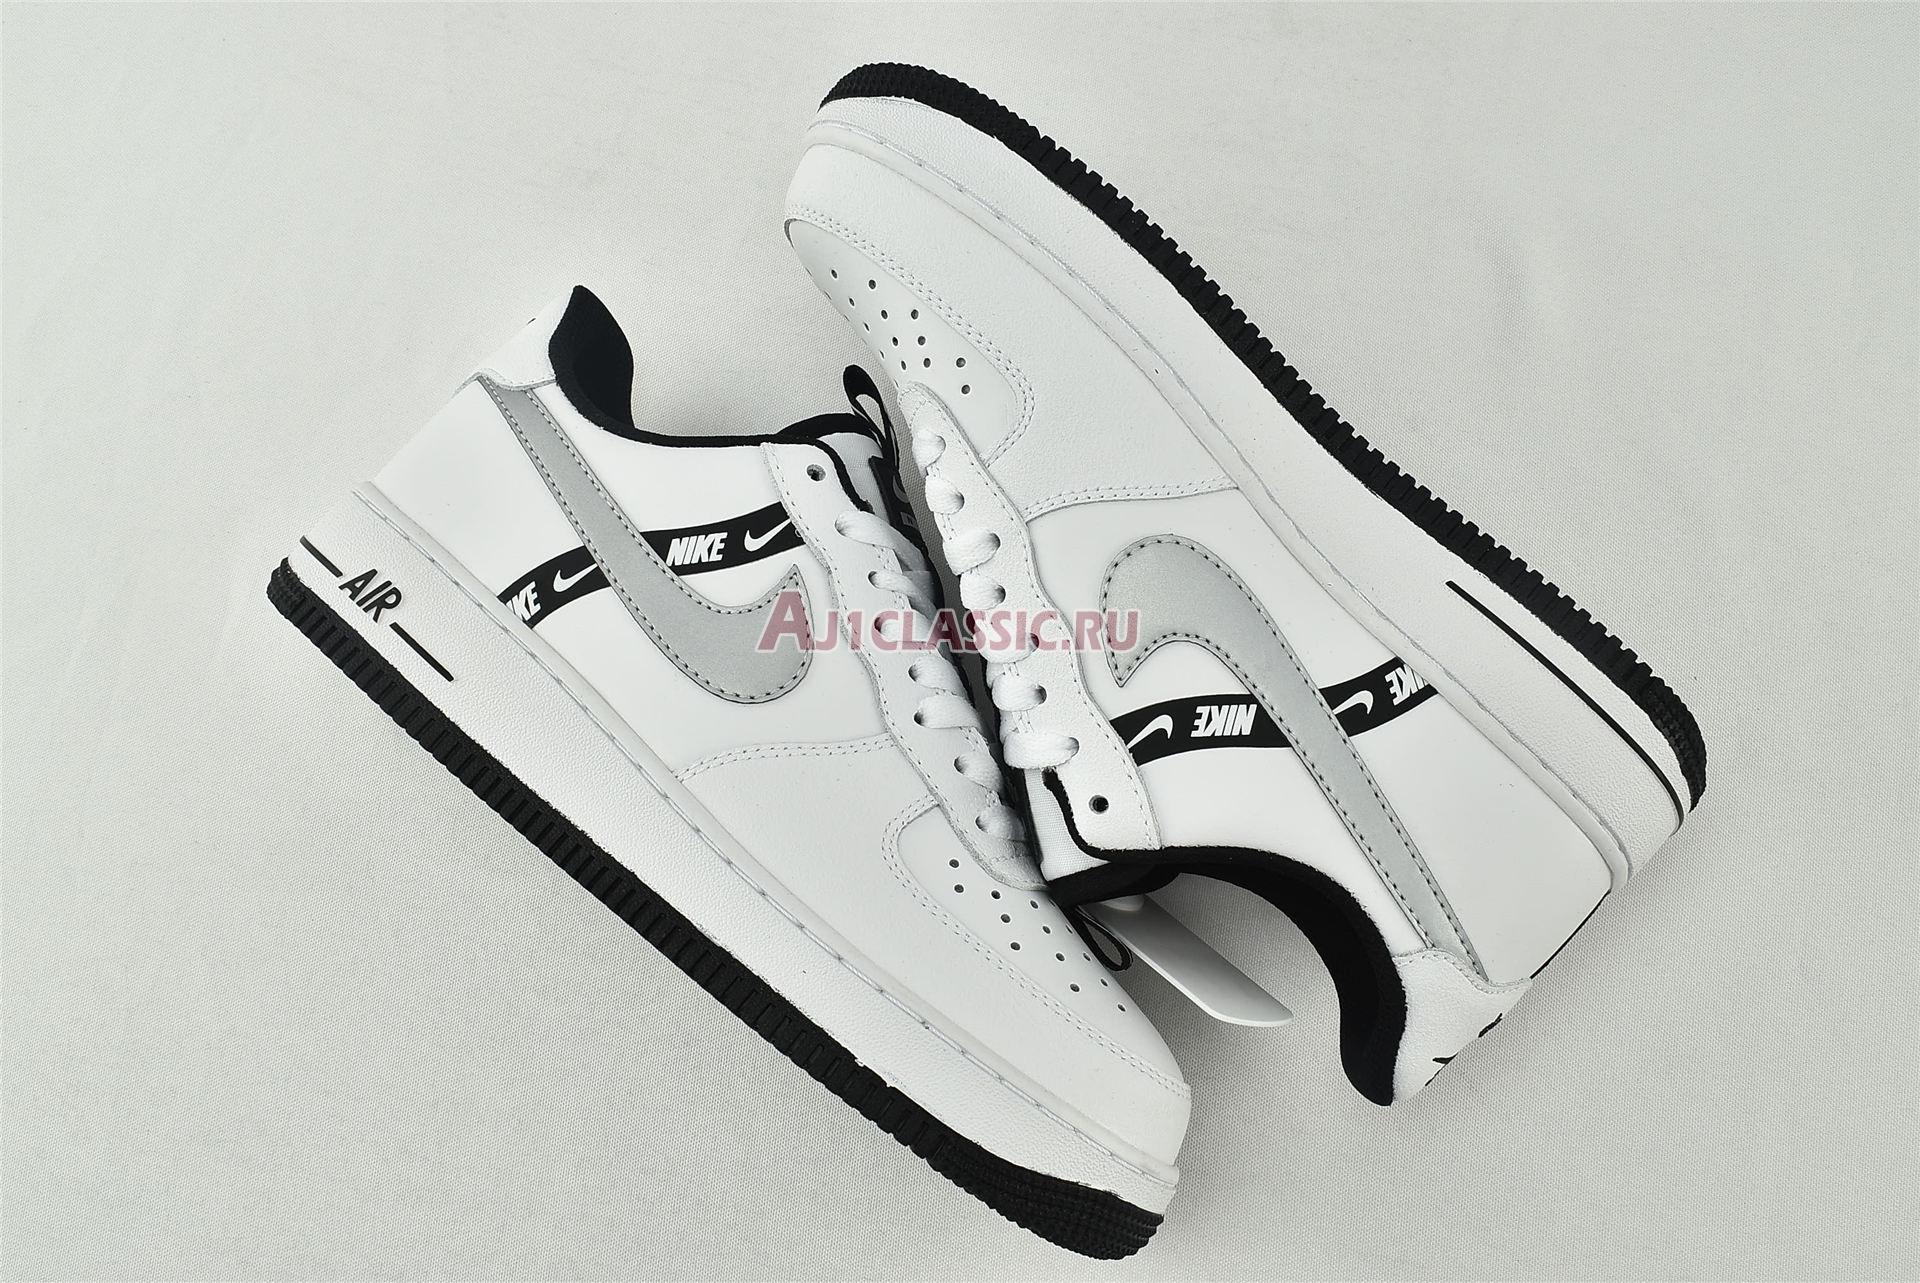 Nike Air Force 1 LV8 KSA GS "Worldwide Pack - White Reflect Silver" CT4683-100